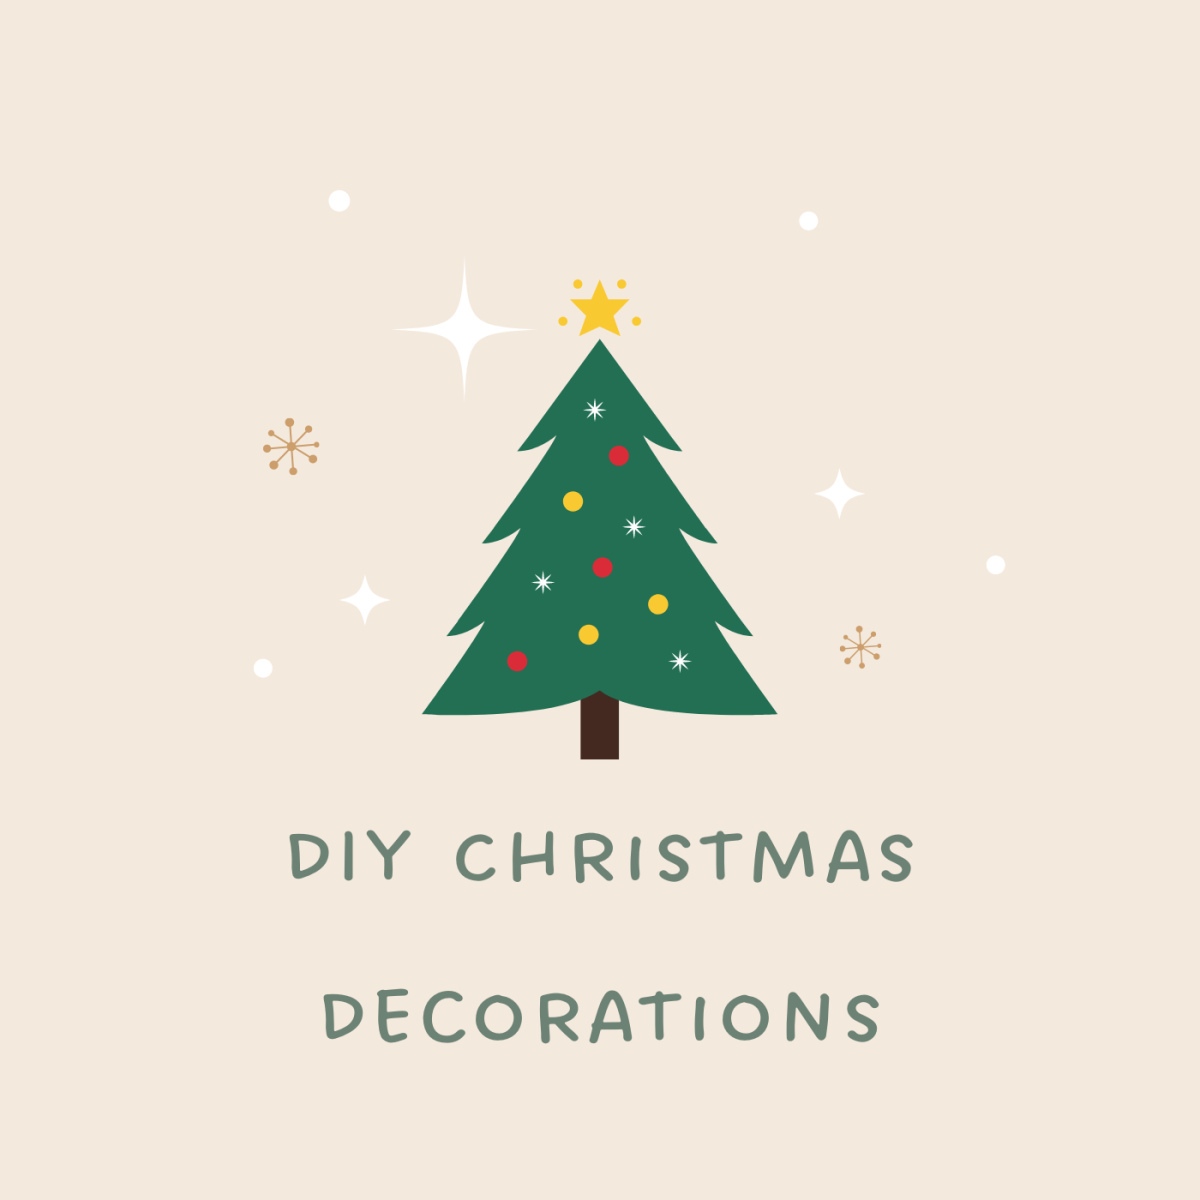 75+ Amazing Christmas Decorations That Are Easy to Make